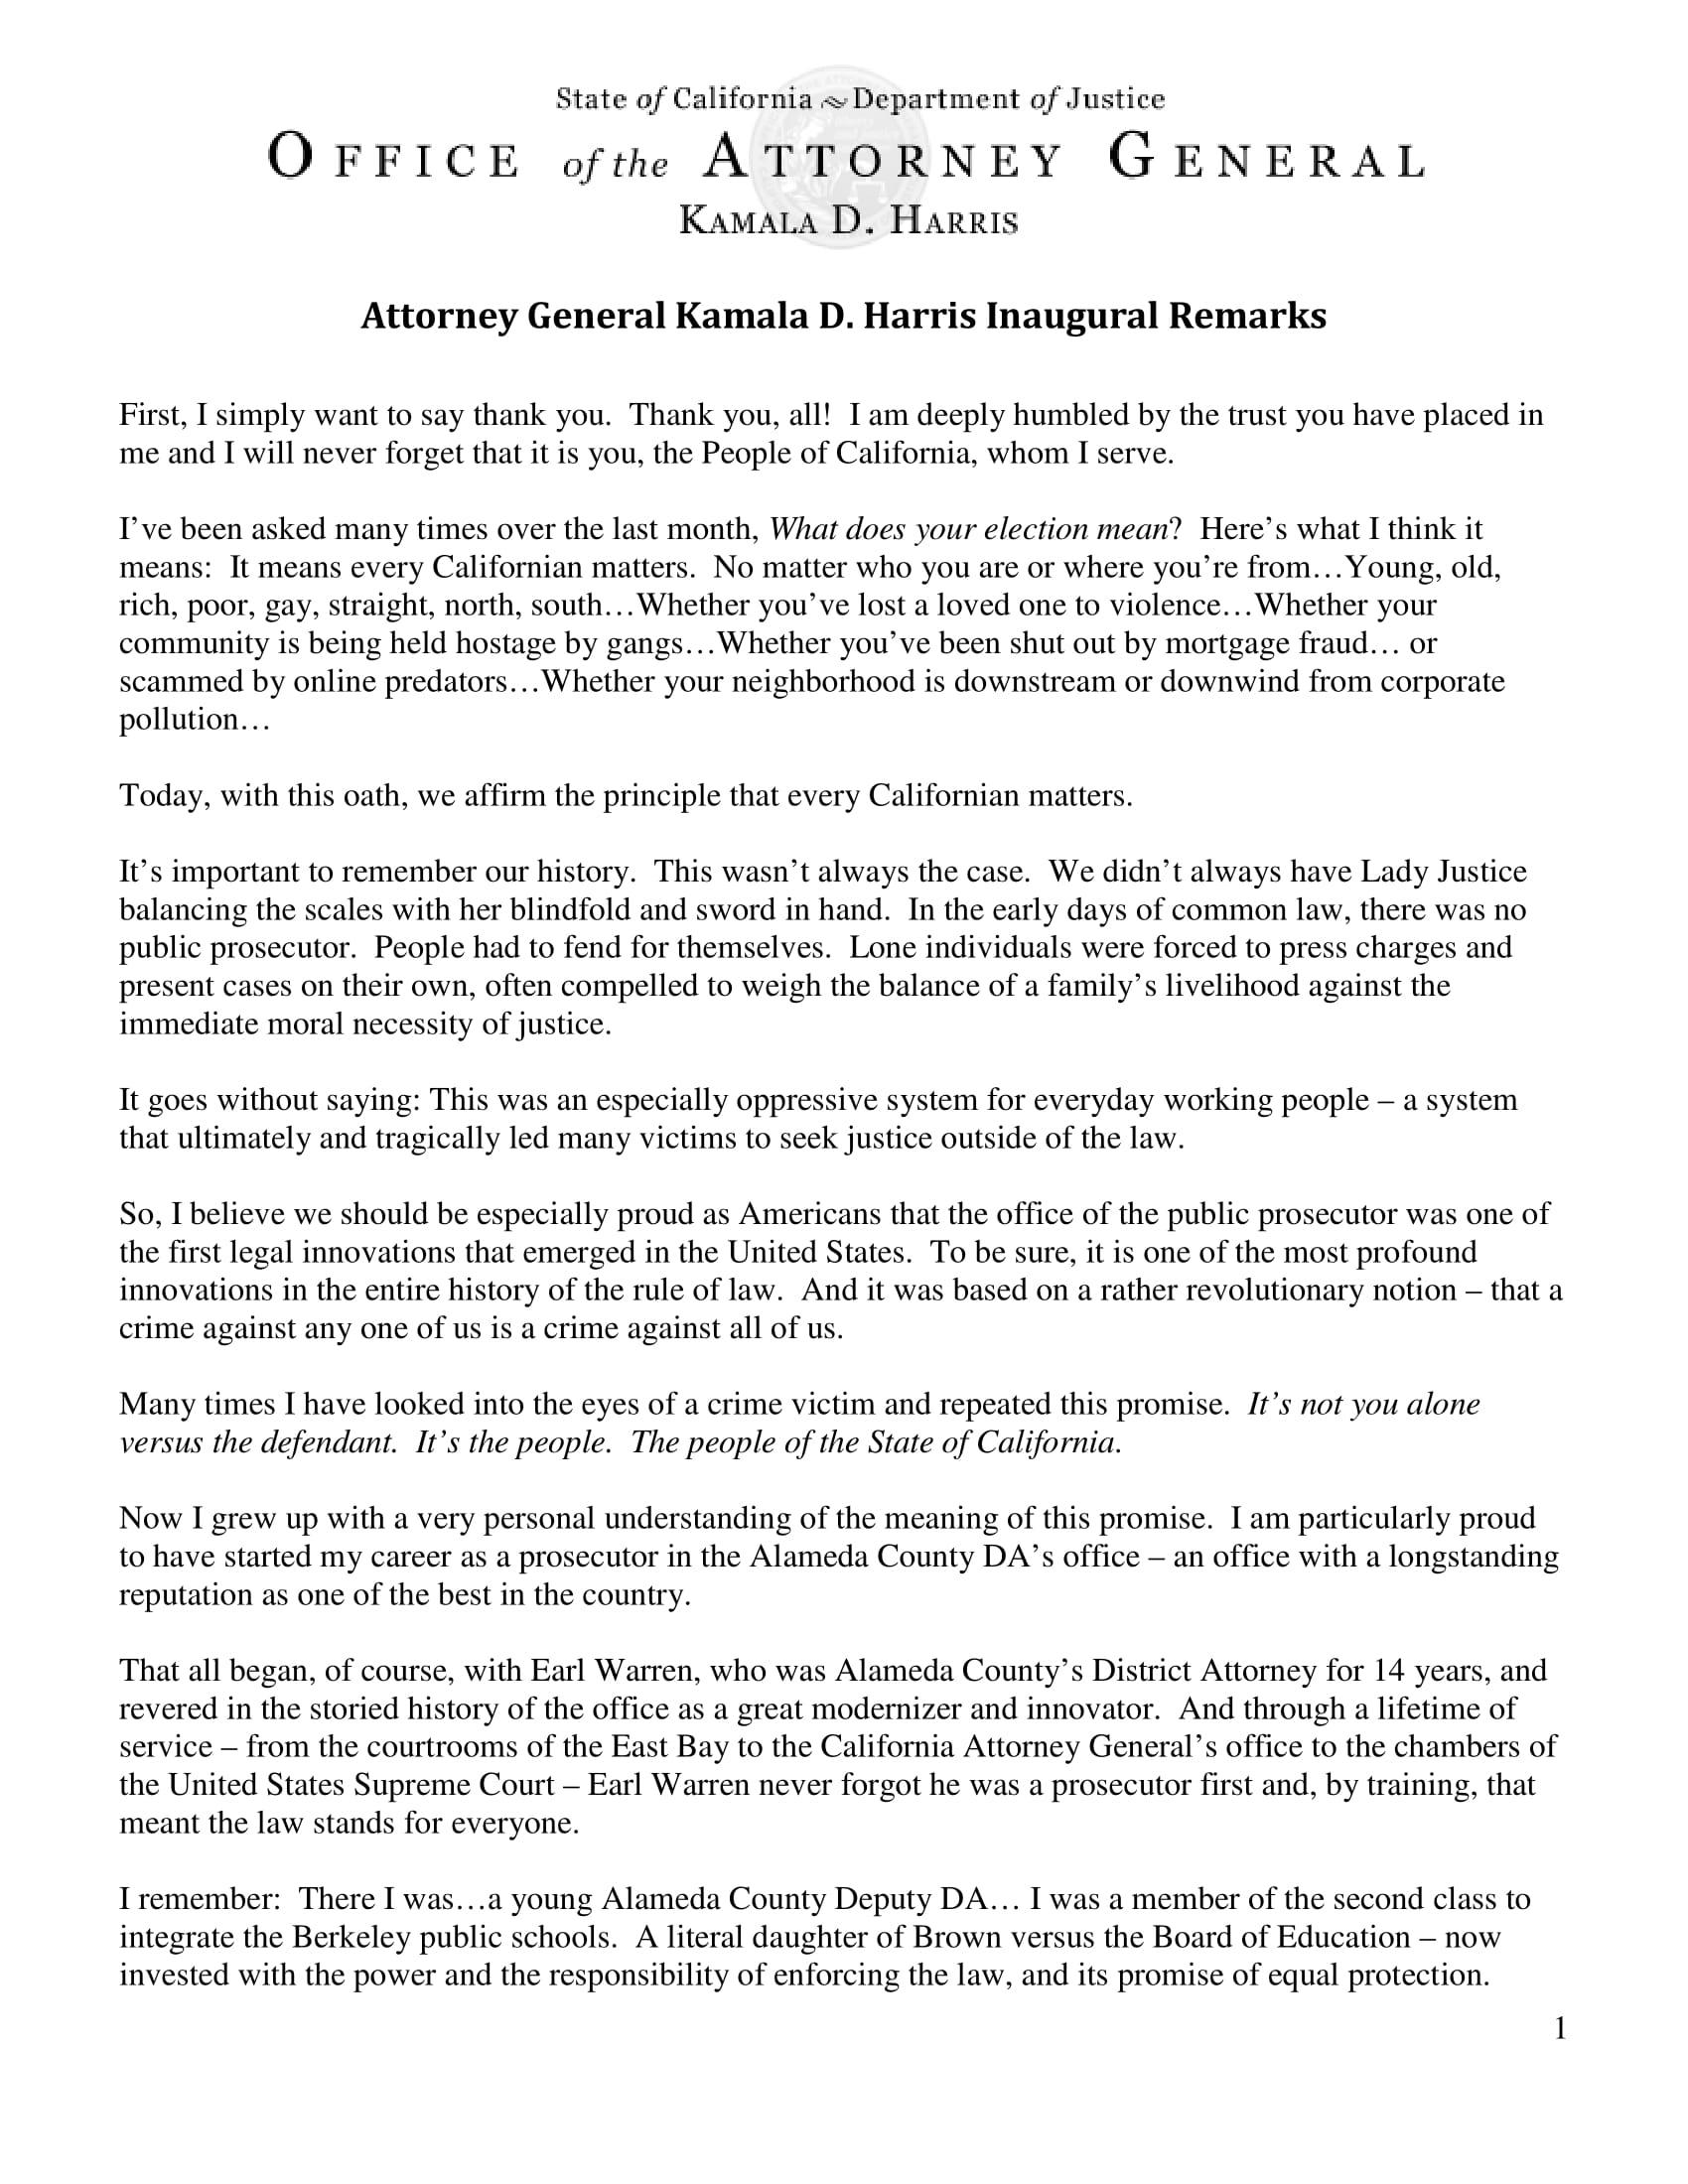 attorney general inaugural remarks example